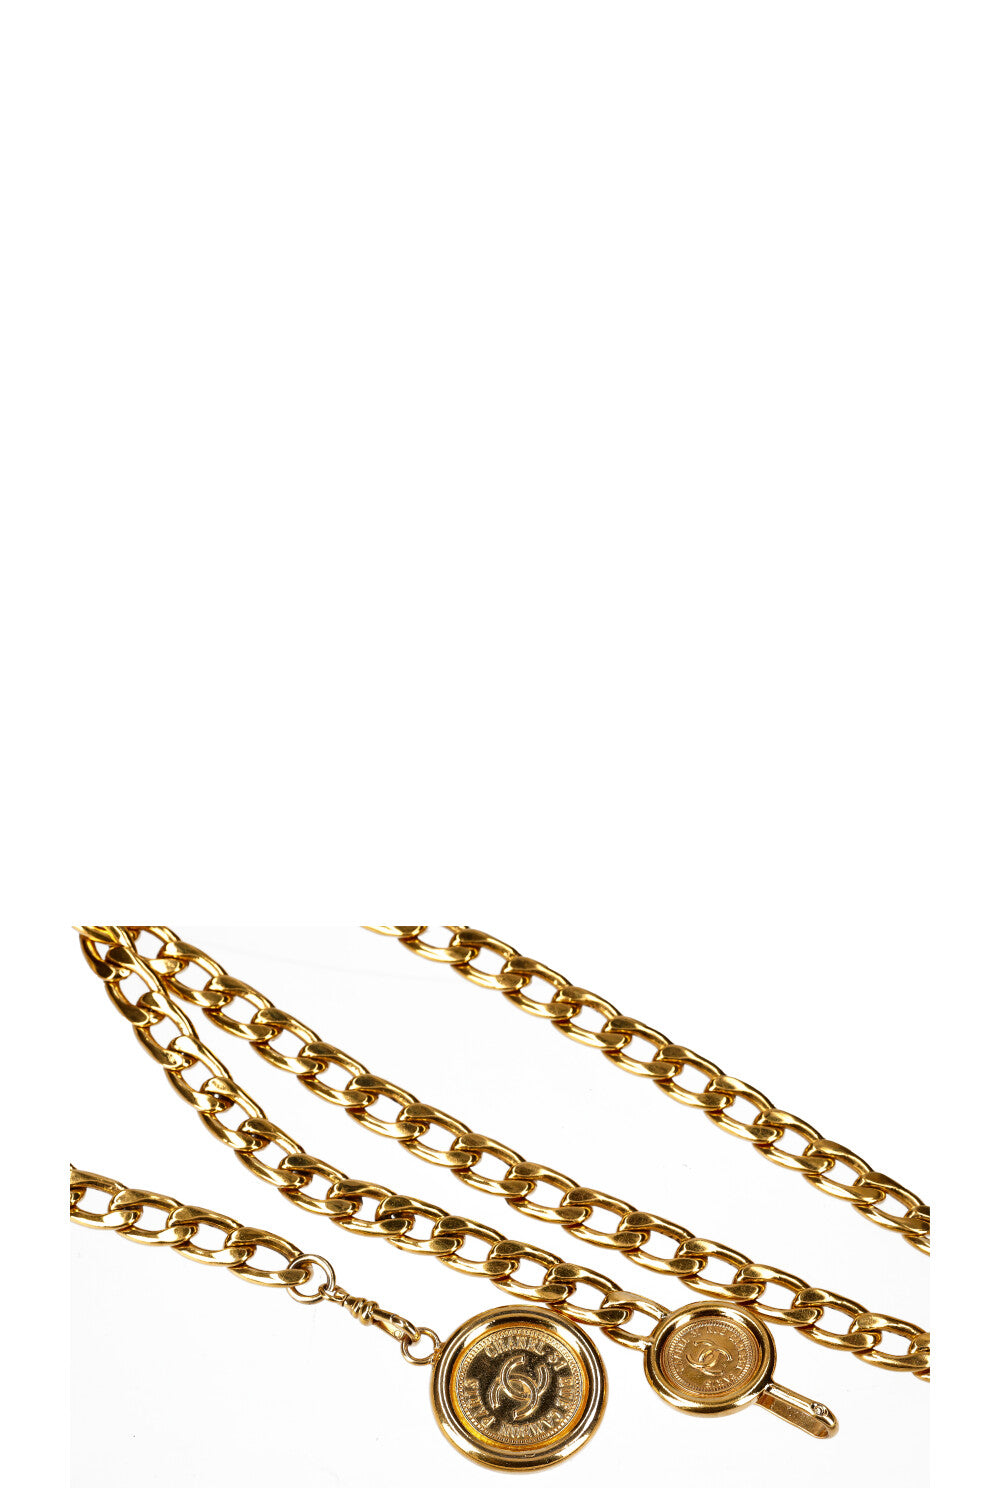 CHANEL Chain Belt with Pendant Gold